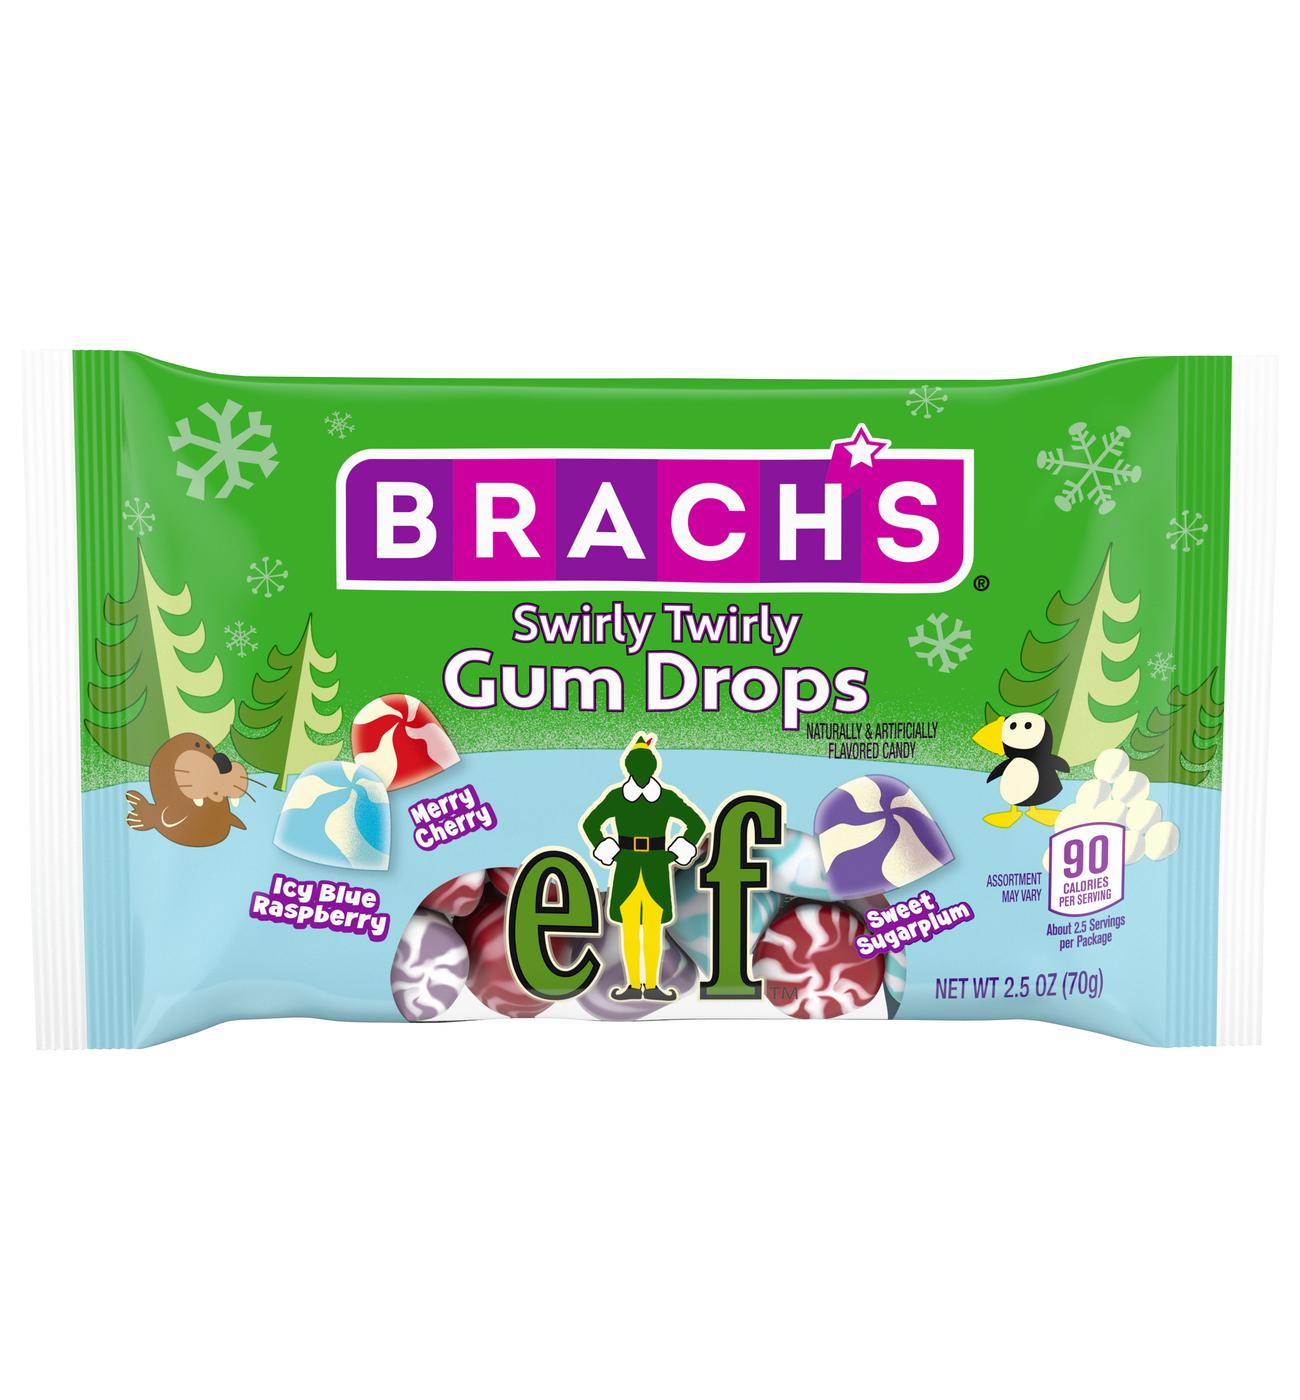 Brach's Swirly Twirly Gum Drops Holiday Candy - Shop Candy at H-E-B